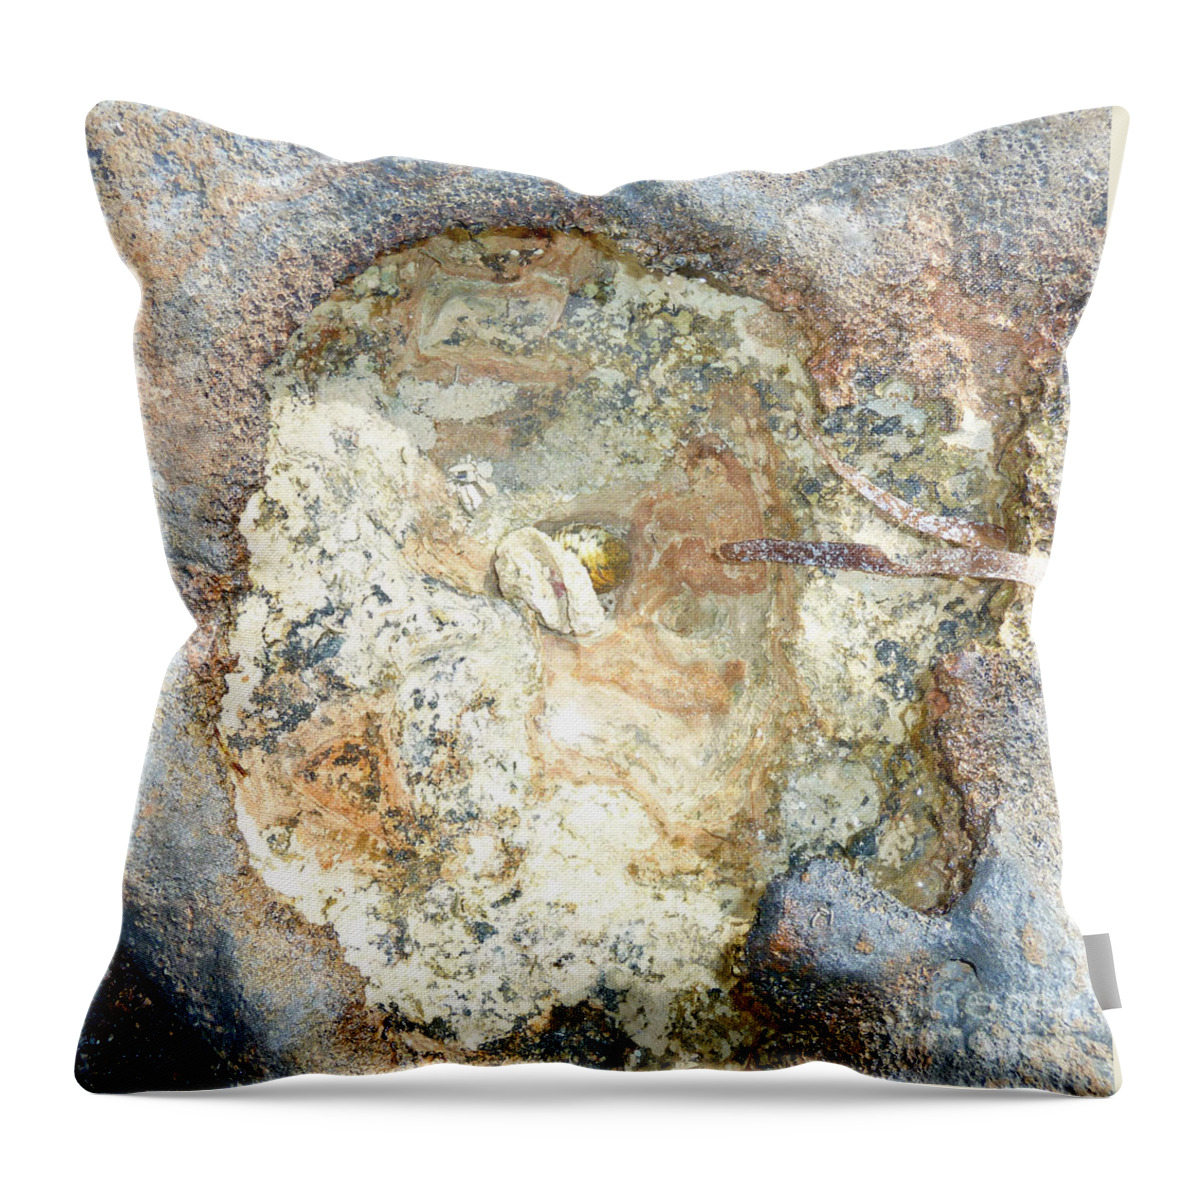 Photography Throw Pillow featuring the photograph Shell in Rock by Francesca Mackenney